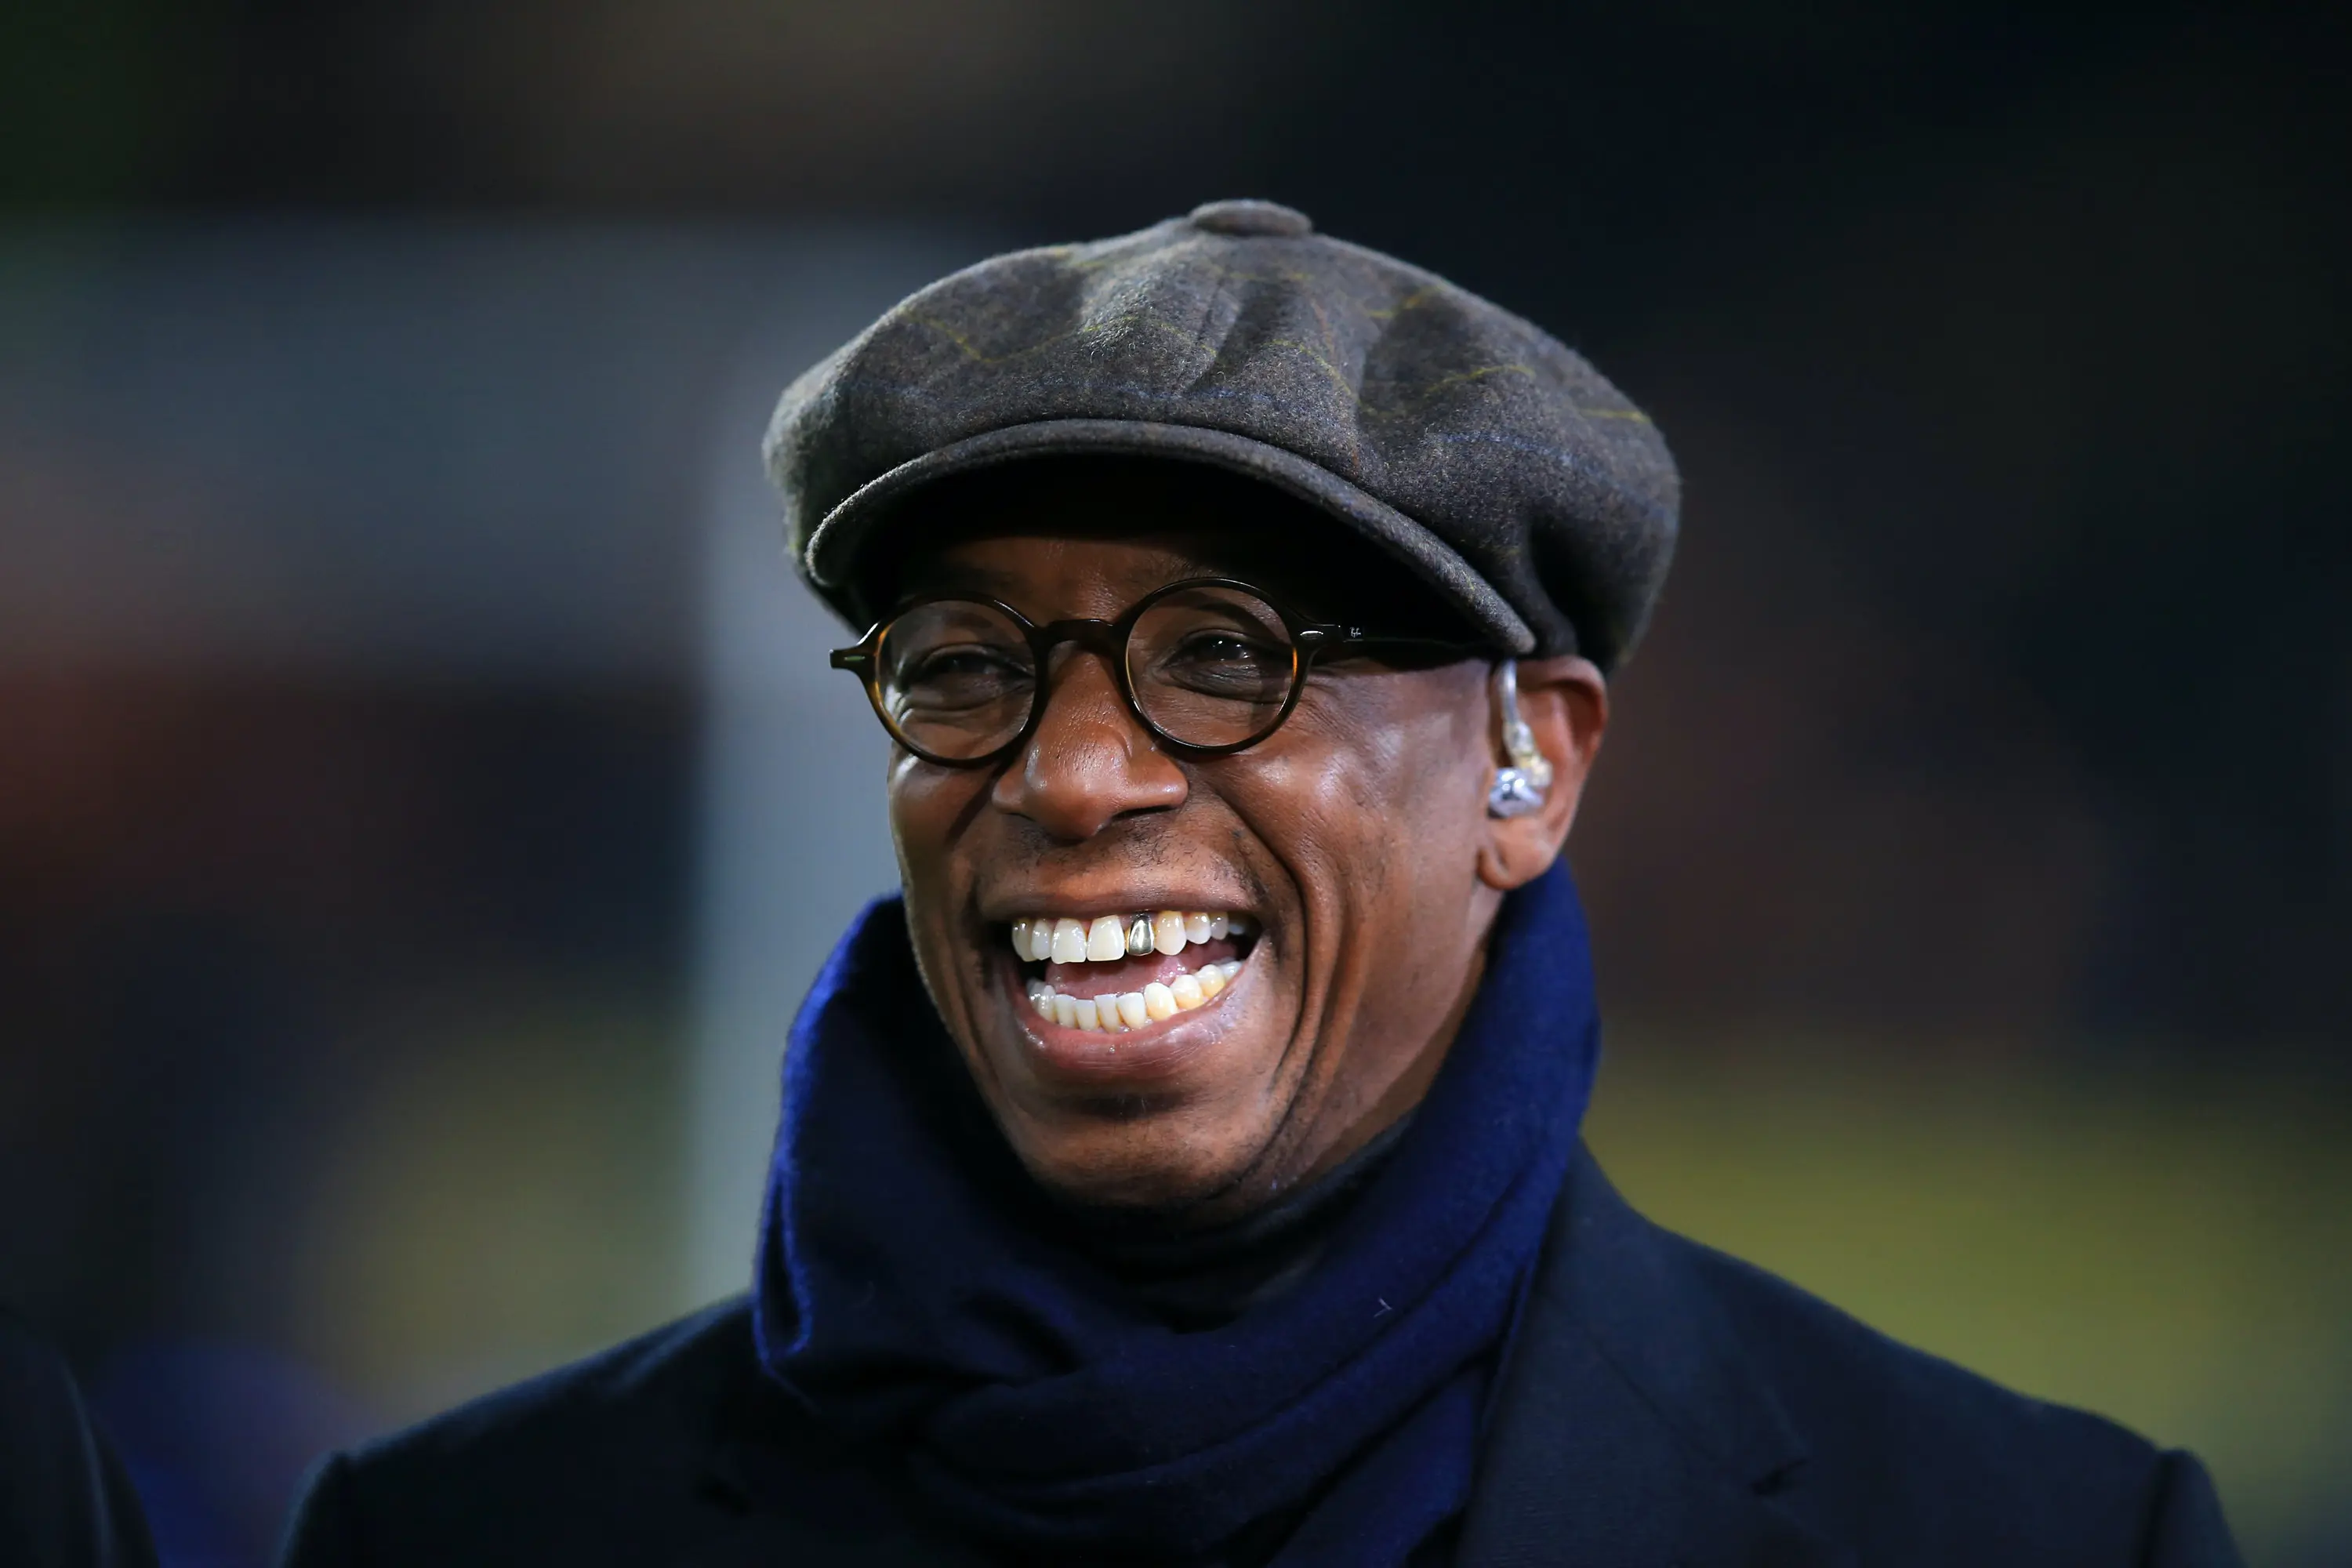 Ian wright laughing scaled